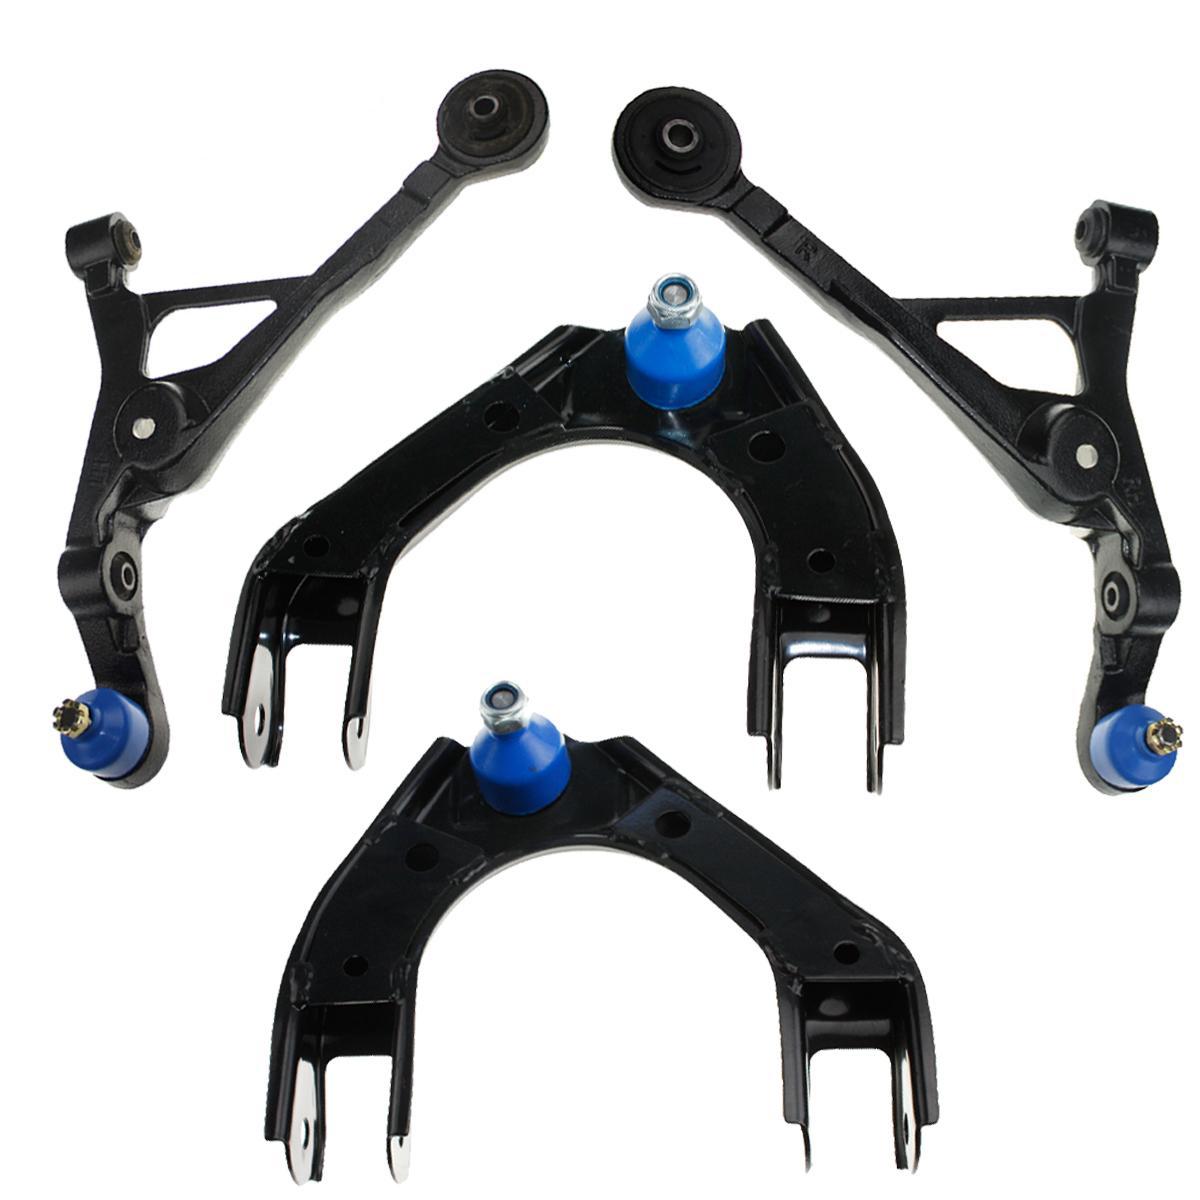 New 2Pcs Front Lower Control Arms For Strayus Sebring Cirrus Breeze K7425 K7427